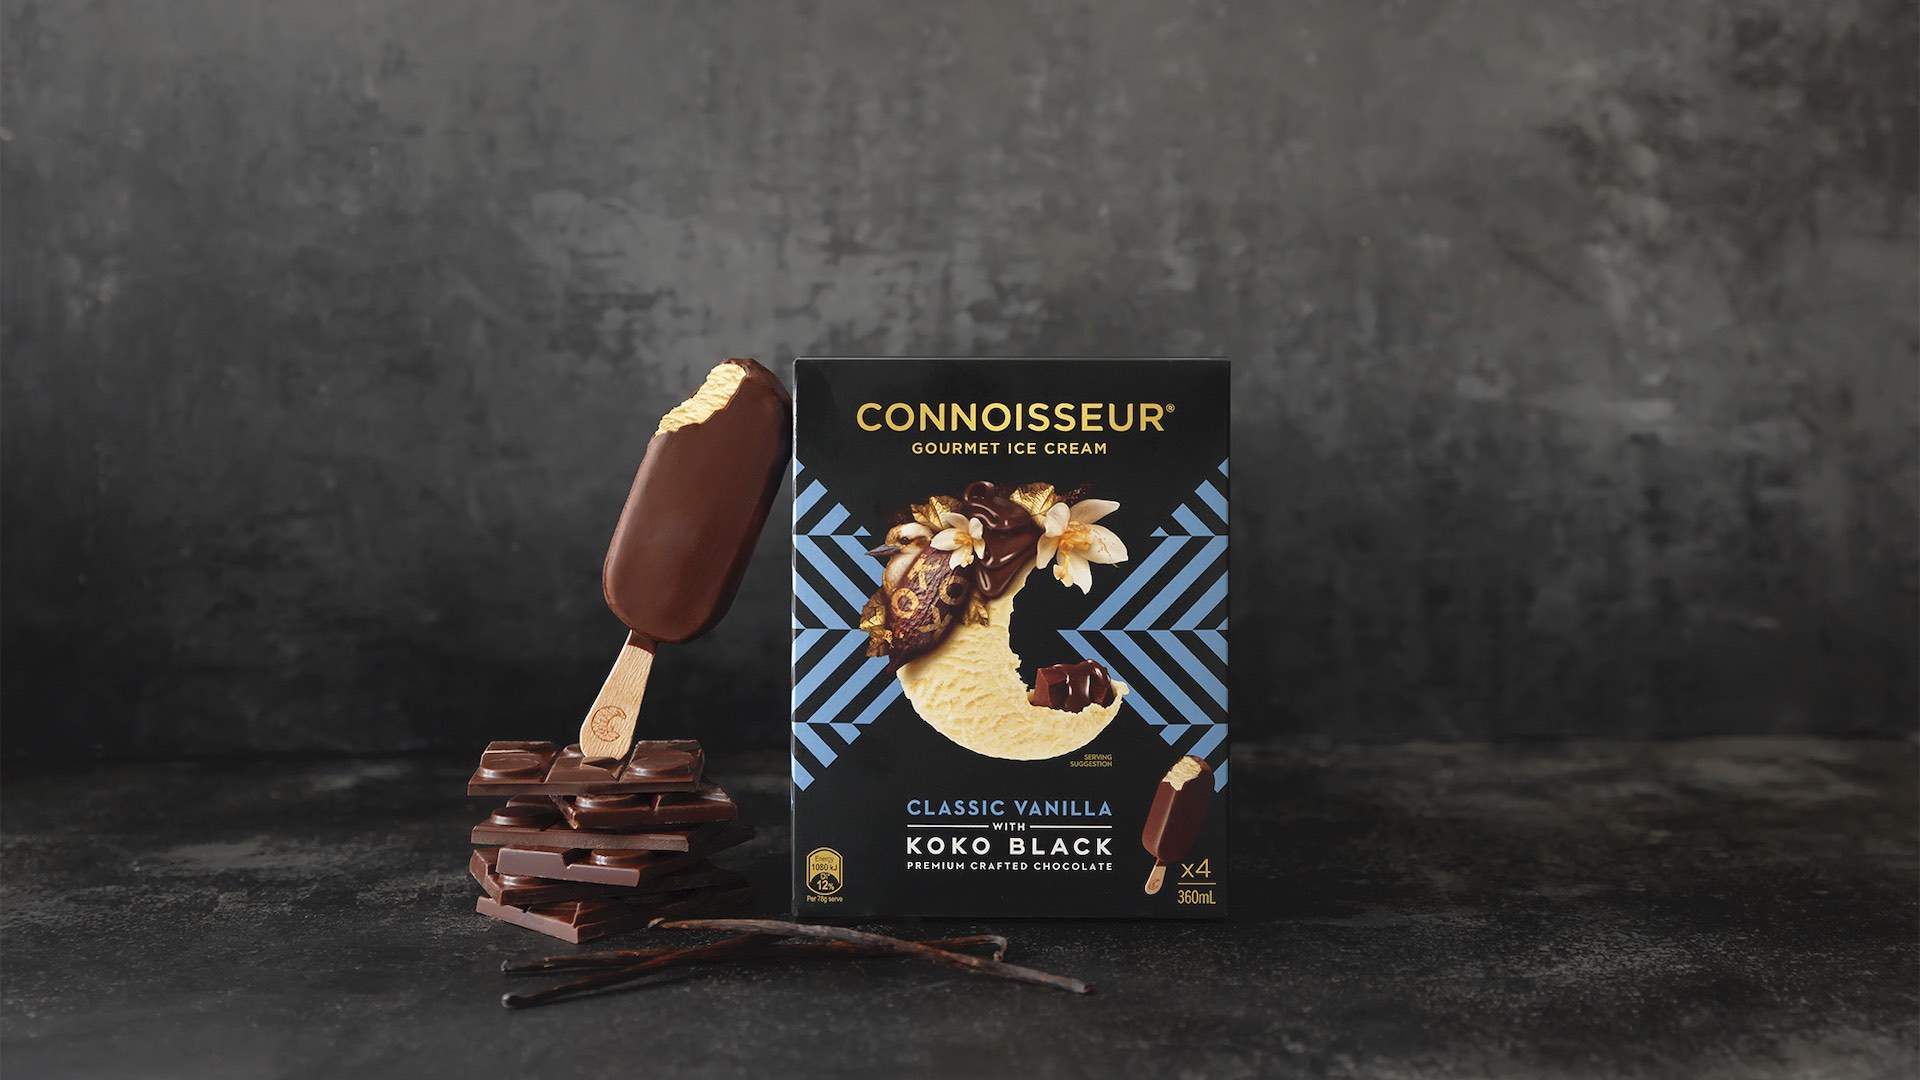 Connoisseur and Koko Black Have Teamed Up for a New Range of Luxurious Ice Cream Sticks